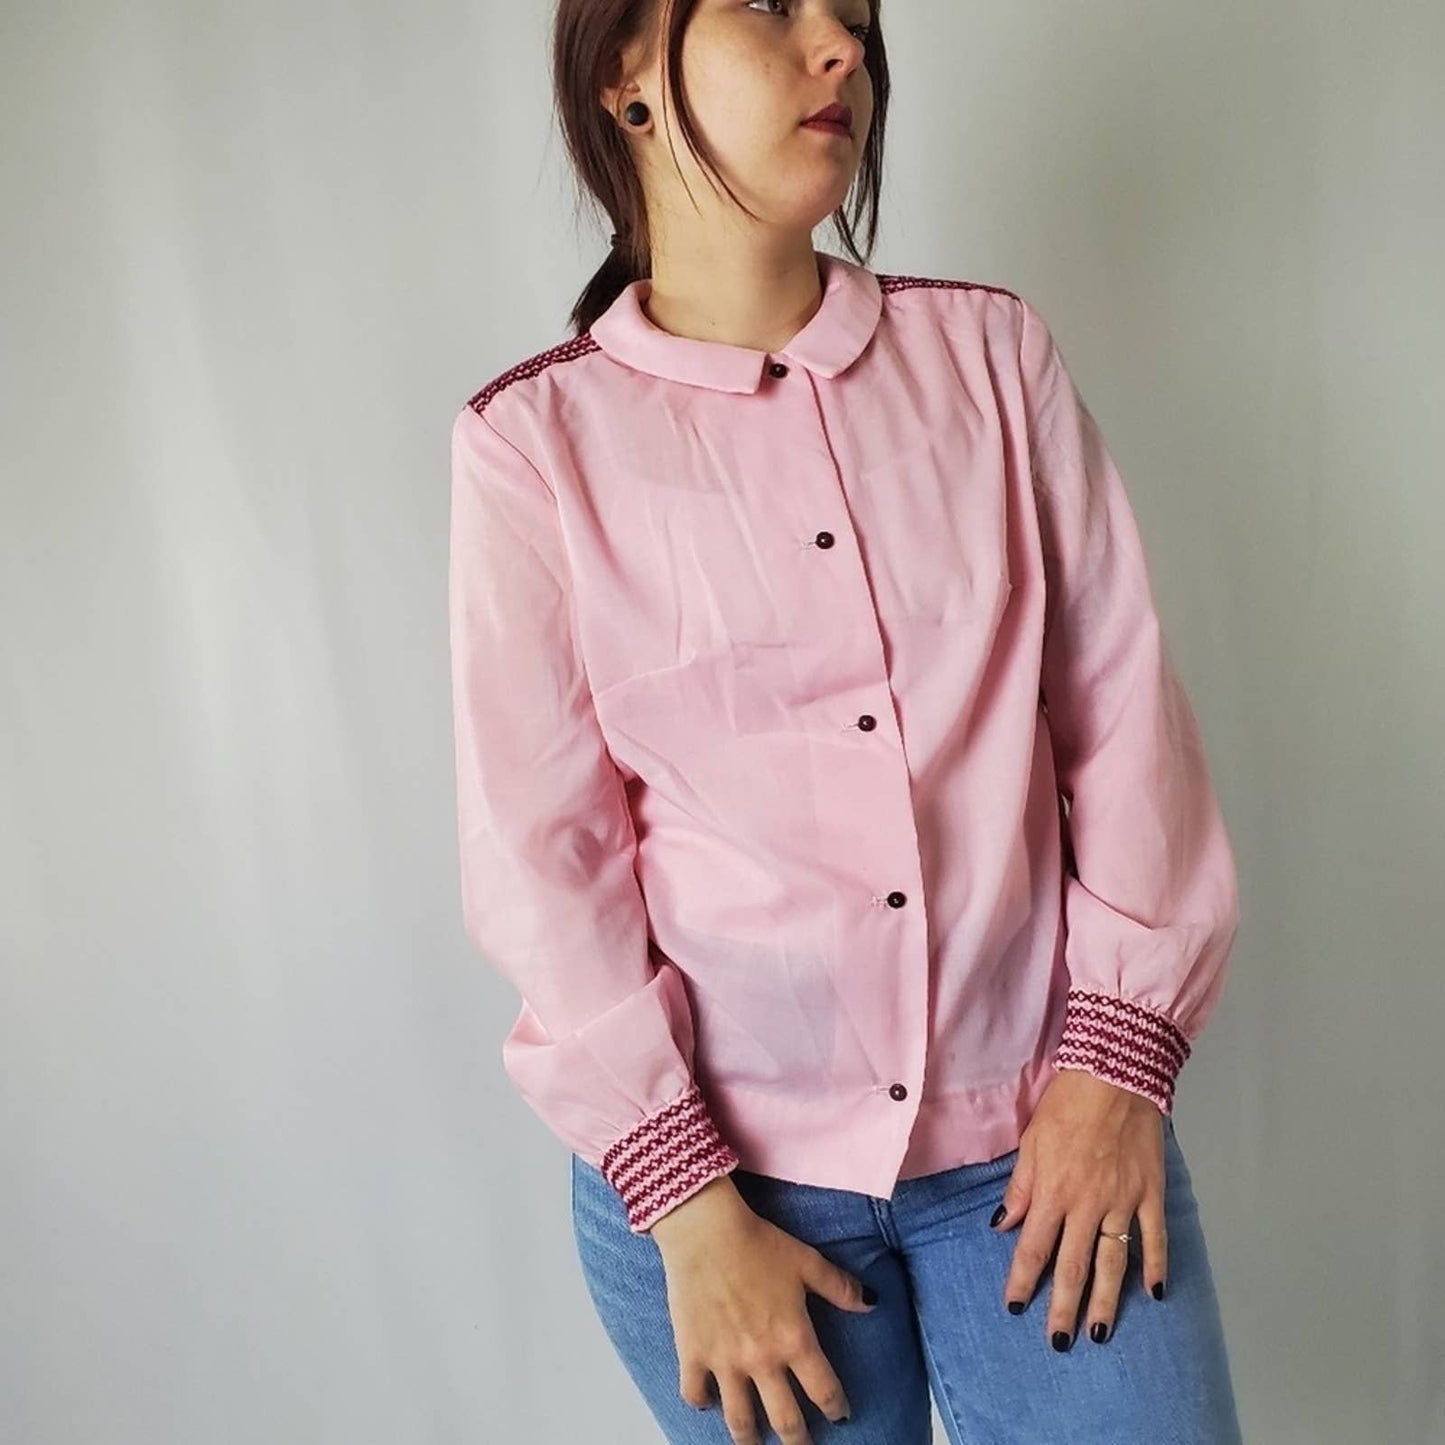 Vintage 70s Fritzi Of Cali Pink Embroidered Blouse - S